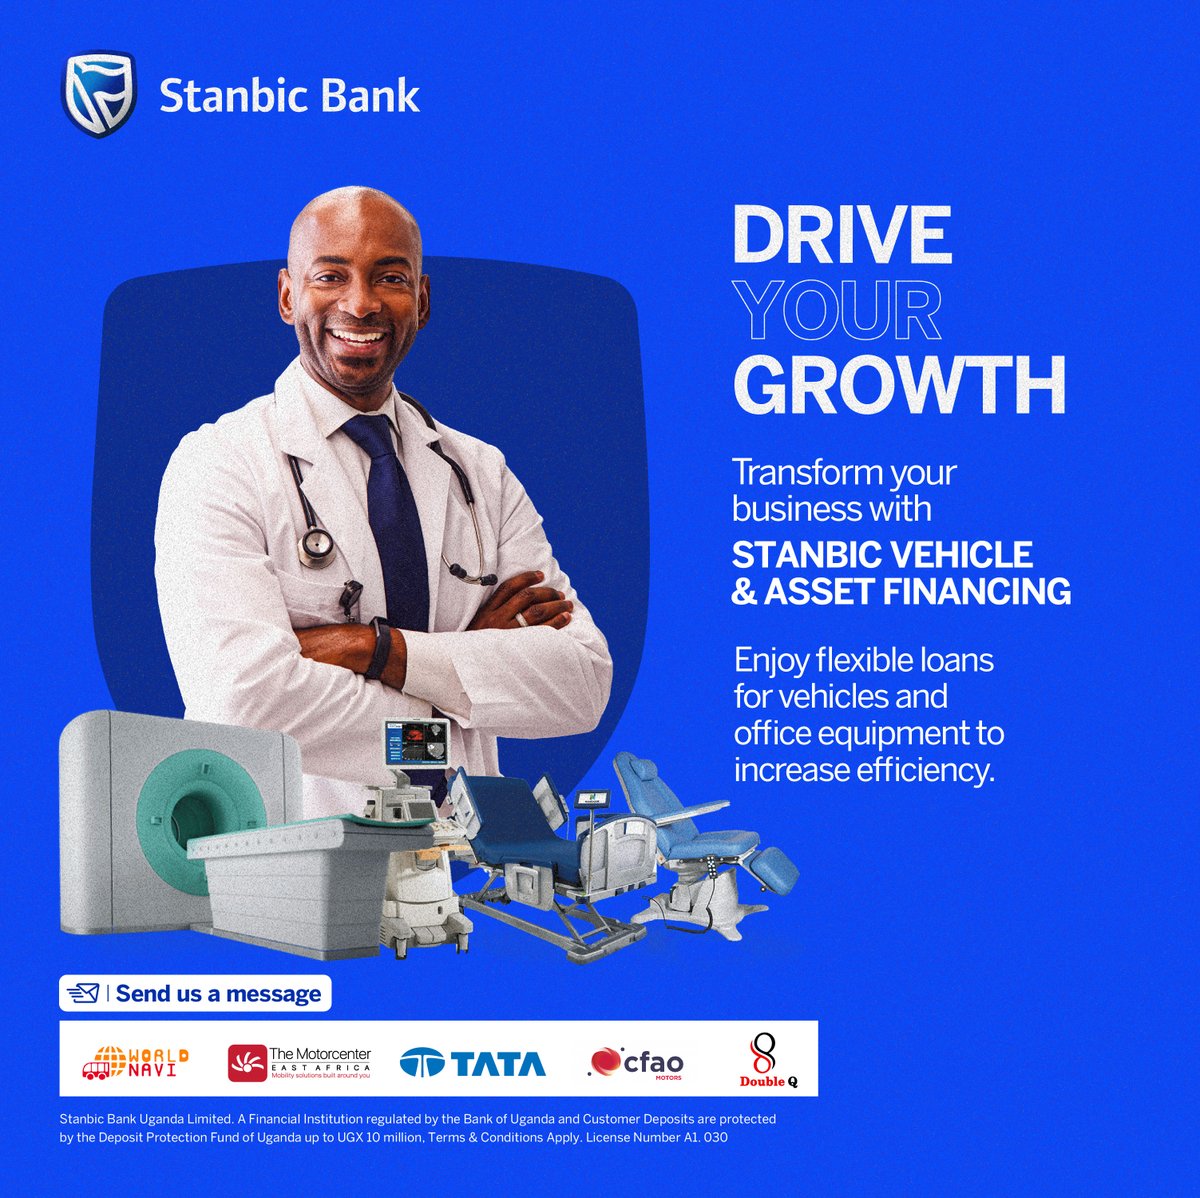 Equip your business or career and increase its efficiency with our Vehicle and Asset Financing offering.

Visit: stanbicbank.co.ug/uganda/busines… or send a message to get started today.

#VehicleAndAssetFinancing.